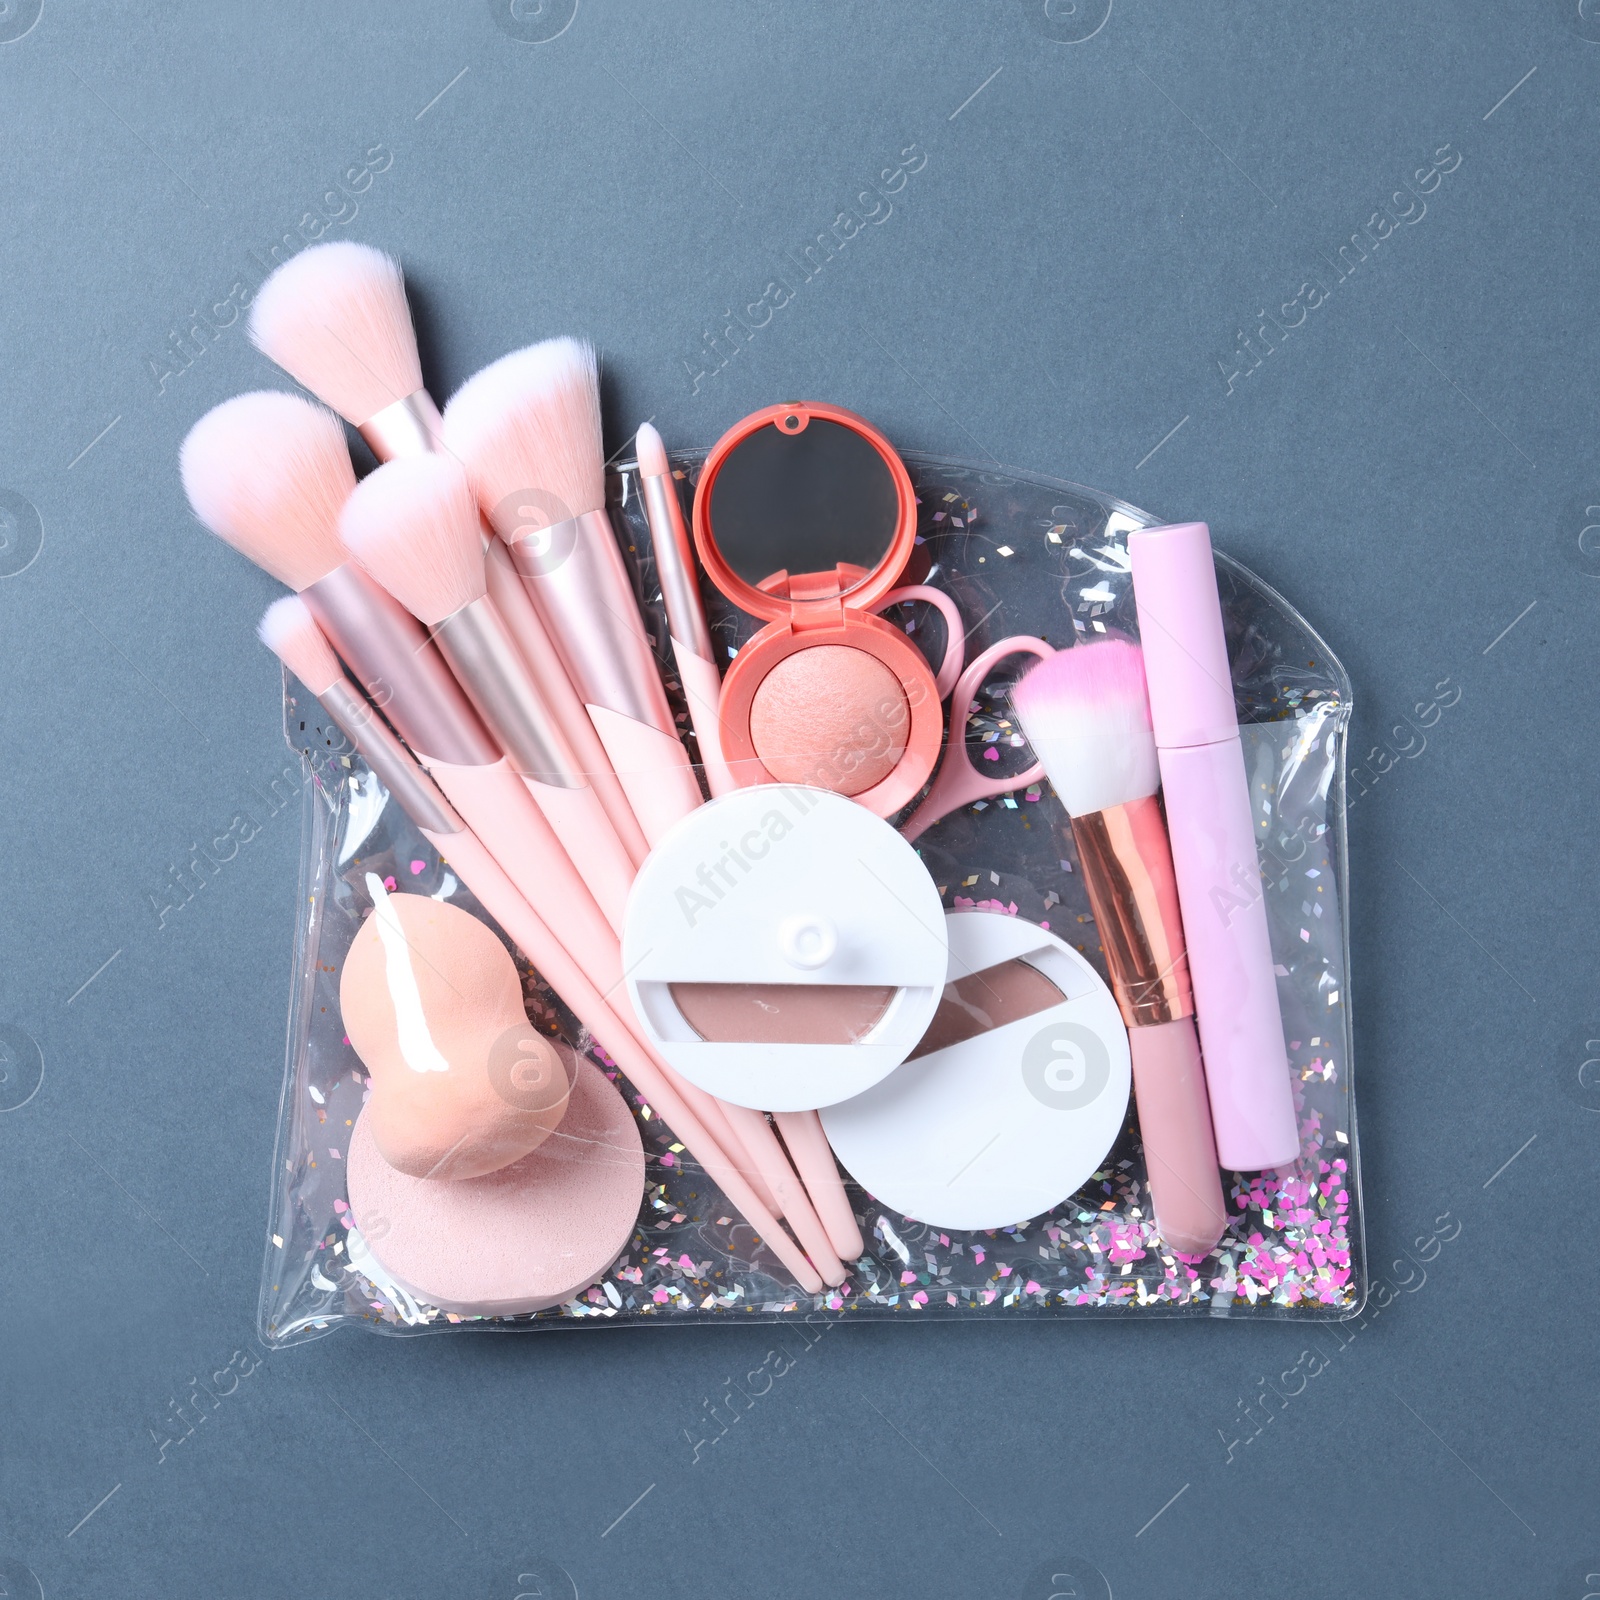 Photo of Plastic cosmetic bag with makeup products and beauty accessories on blue-gray background, top view